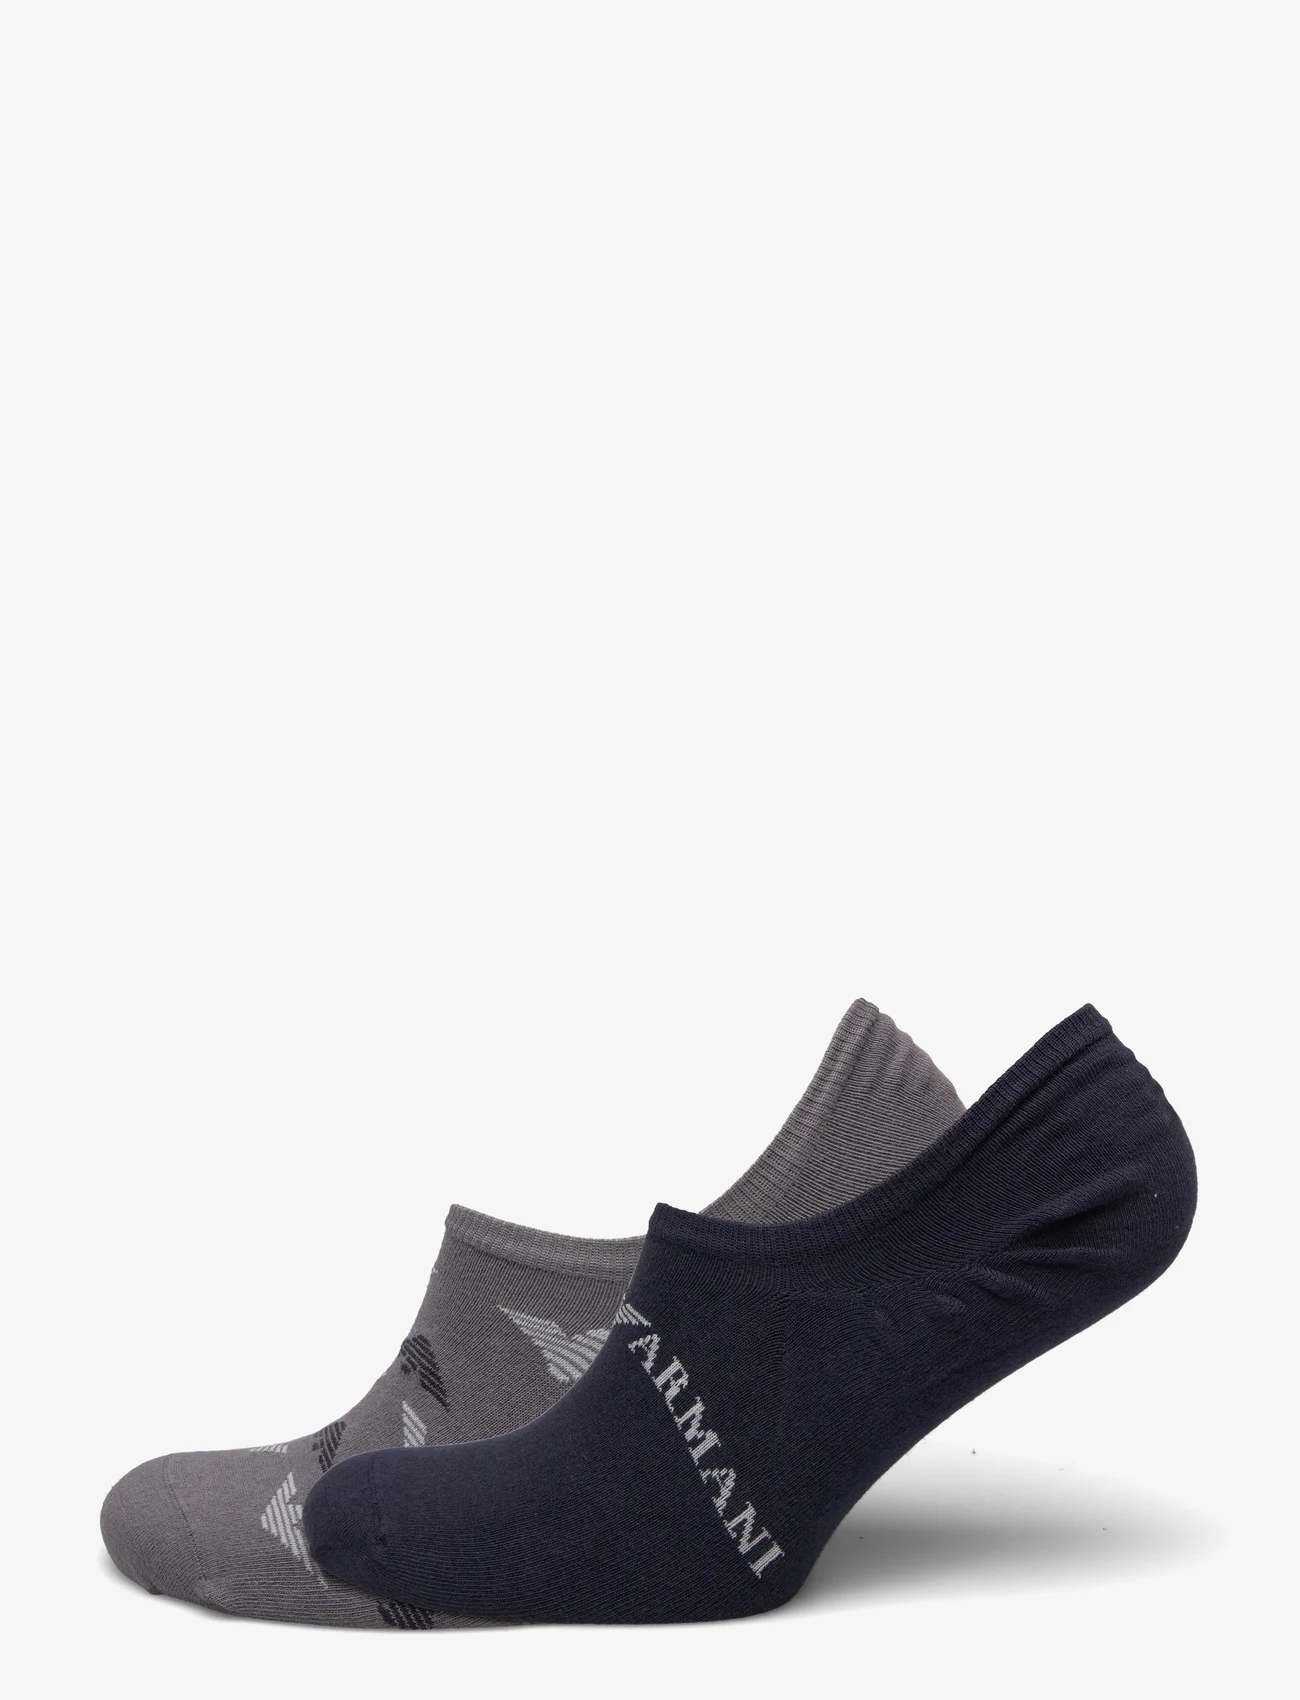 Emporio Armani - 2PACK SOCKS - lowest prices - 52636-marin/antrac/eag.mar - 0